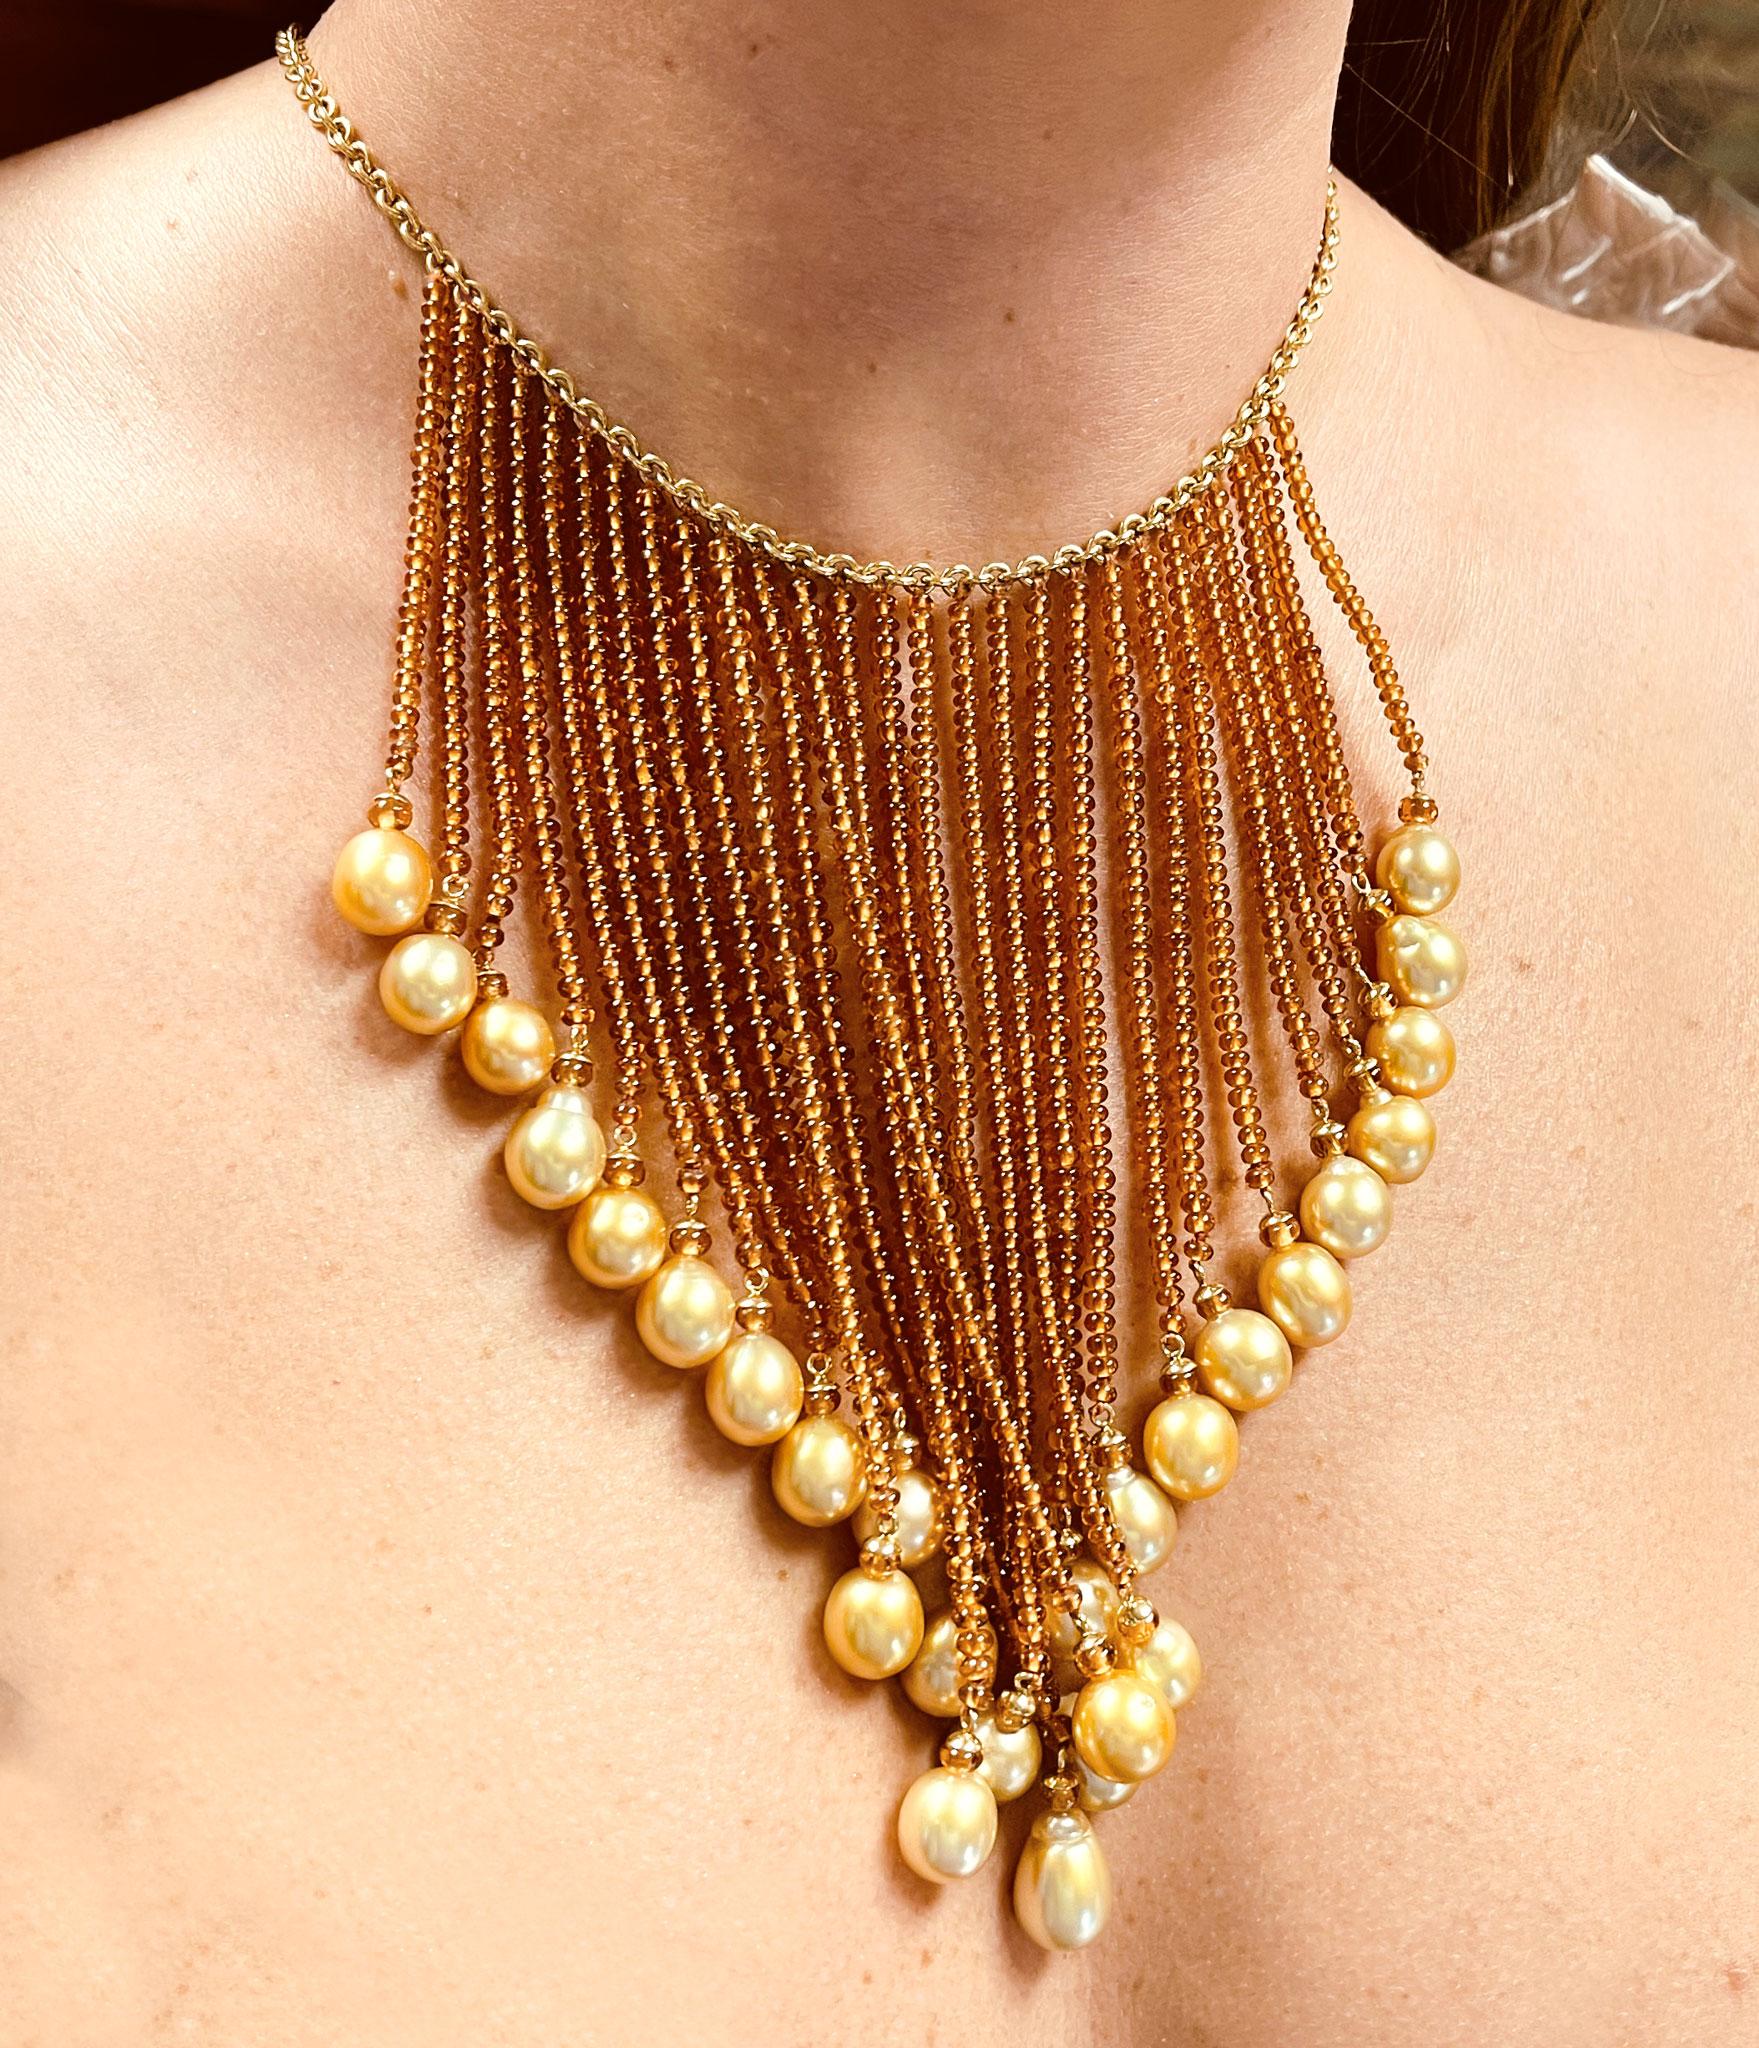 South Sea Pearls = 10-11 mm
Gemstones: Fine Citrine
Metal: 18K Gold
Made in Italy
Length: 16 inches